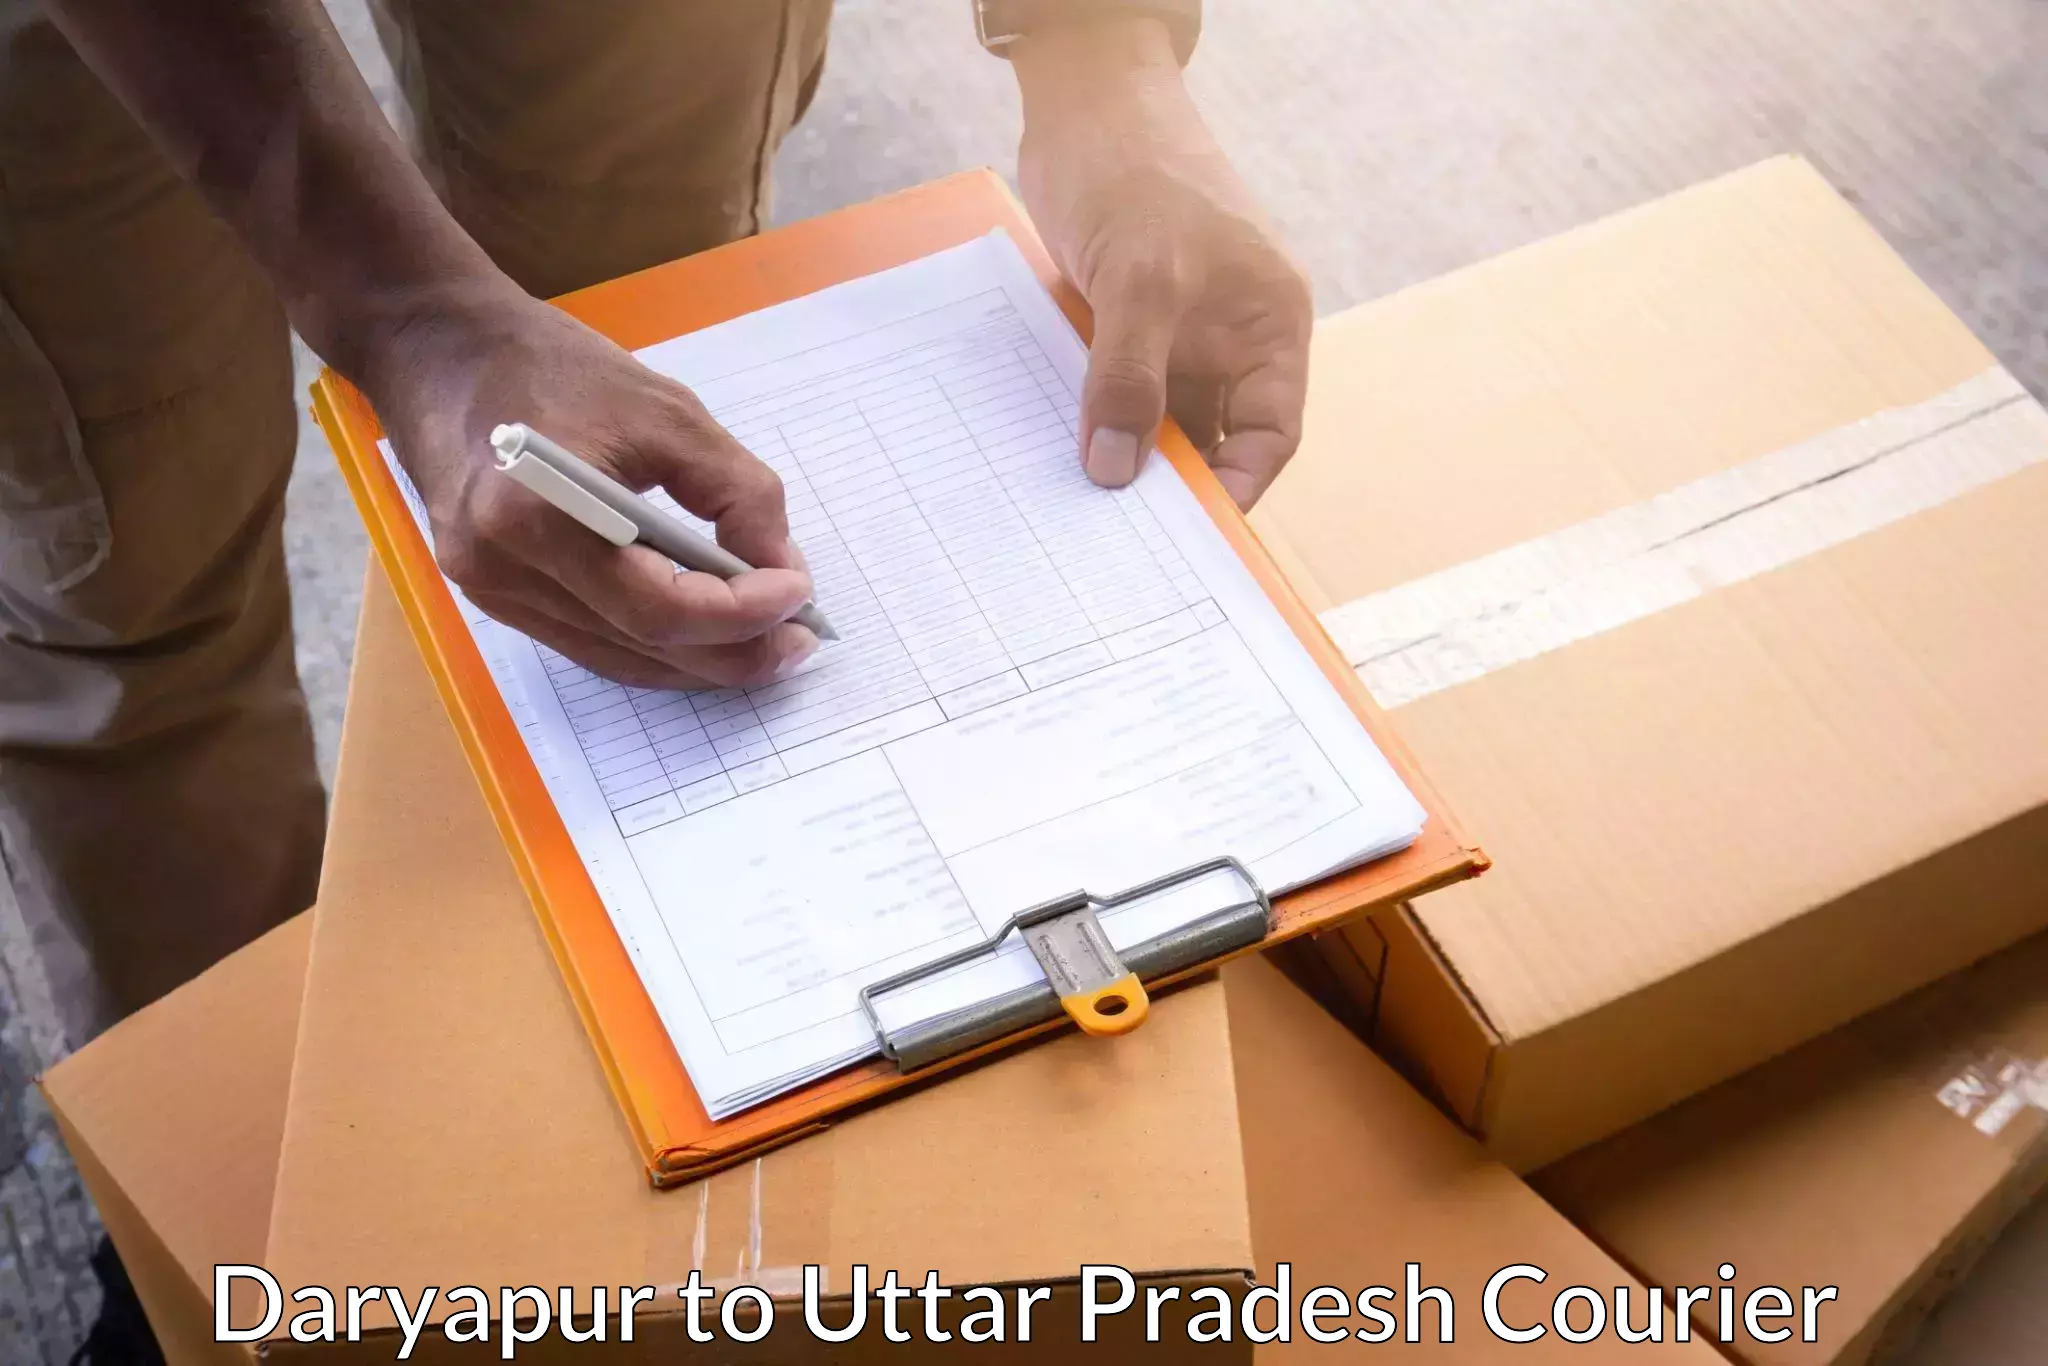 Global courier networks Daryapur to Aligarh